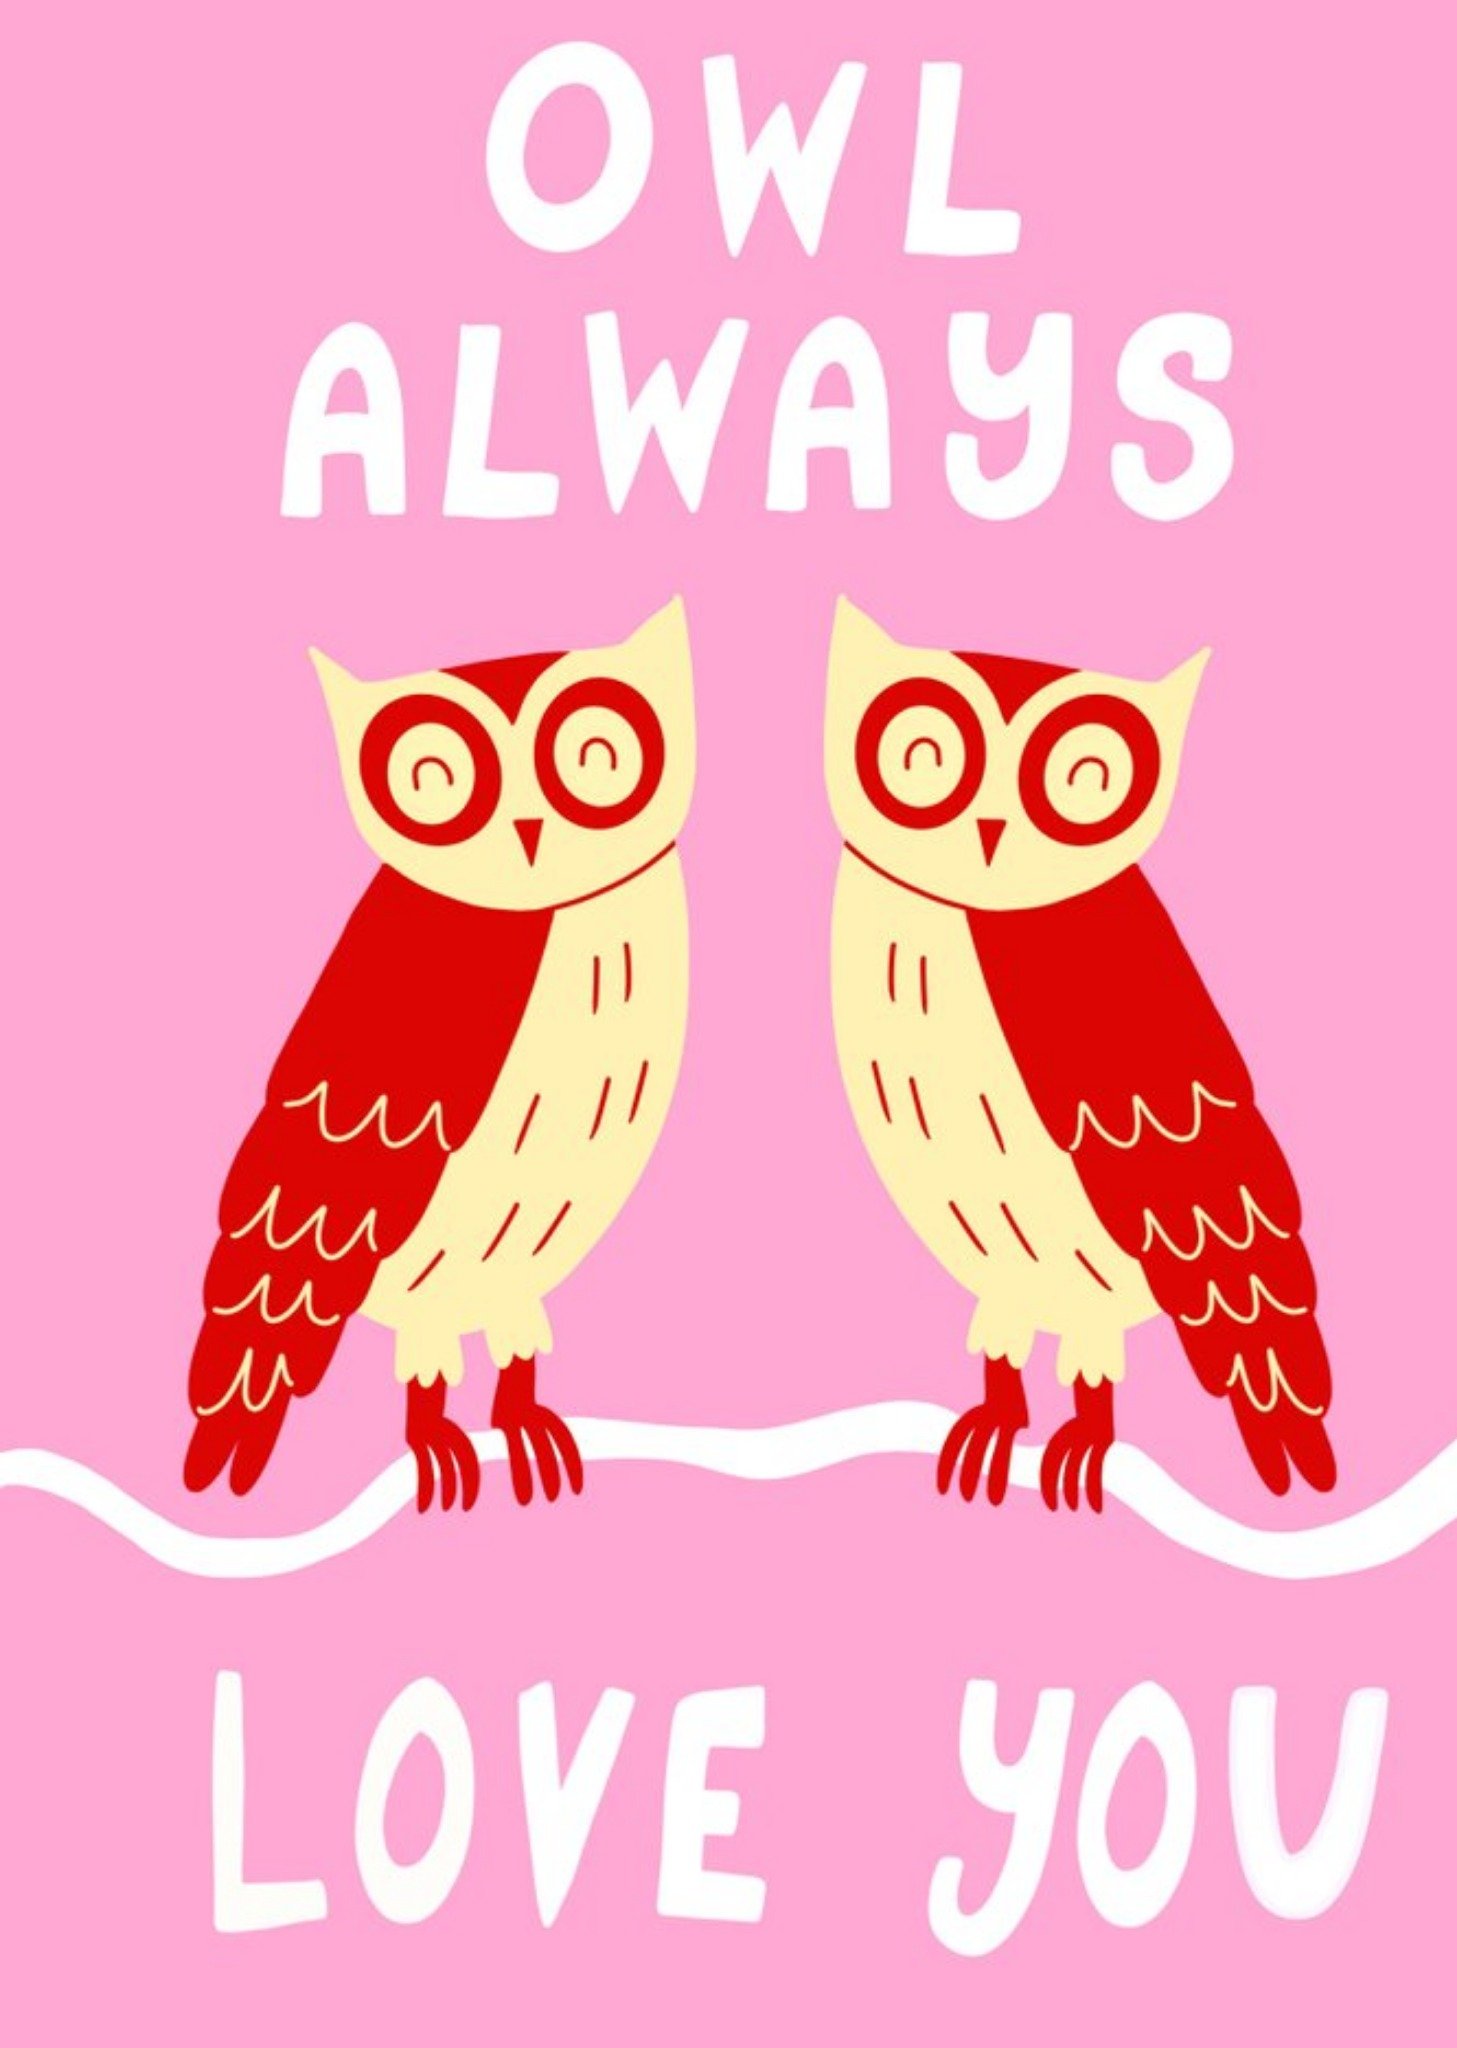 Moonpig Illlustrated Owls Pun Owl Always Love You Valentines Day Card, Large